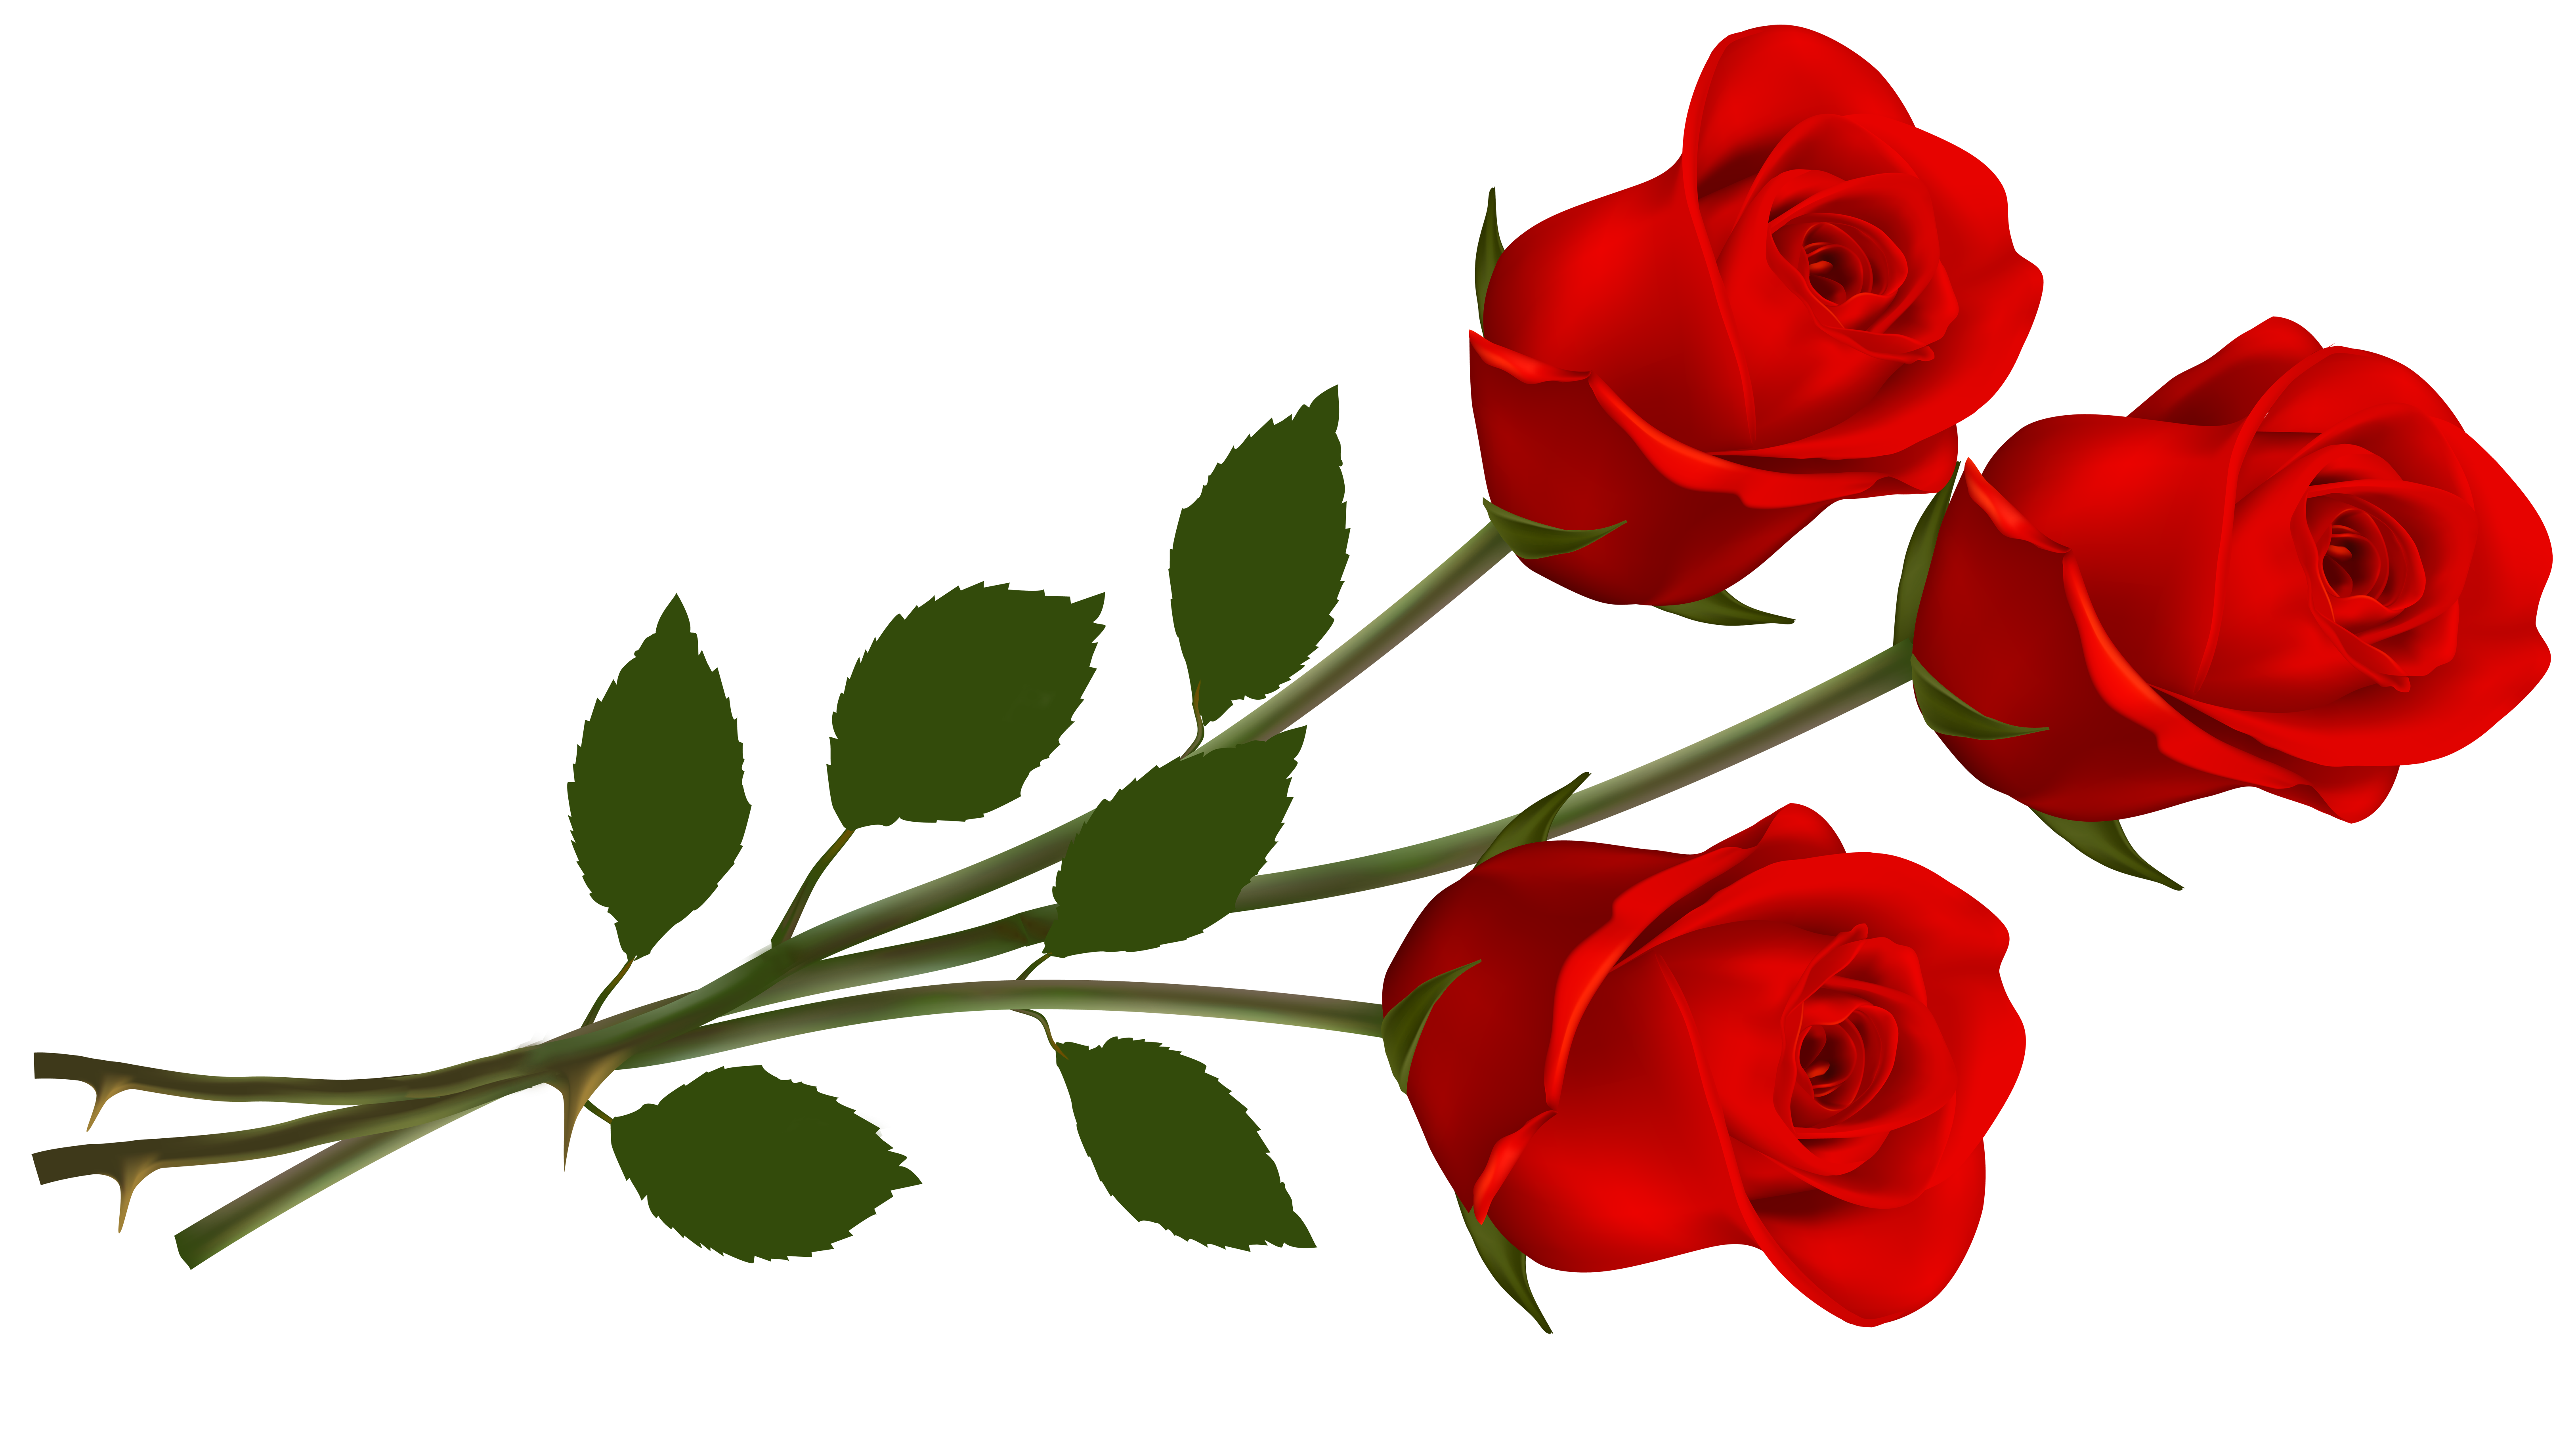 Free red rose clipart png